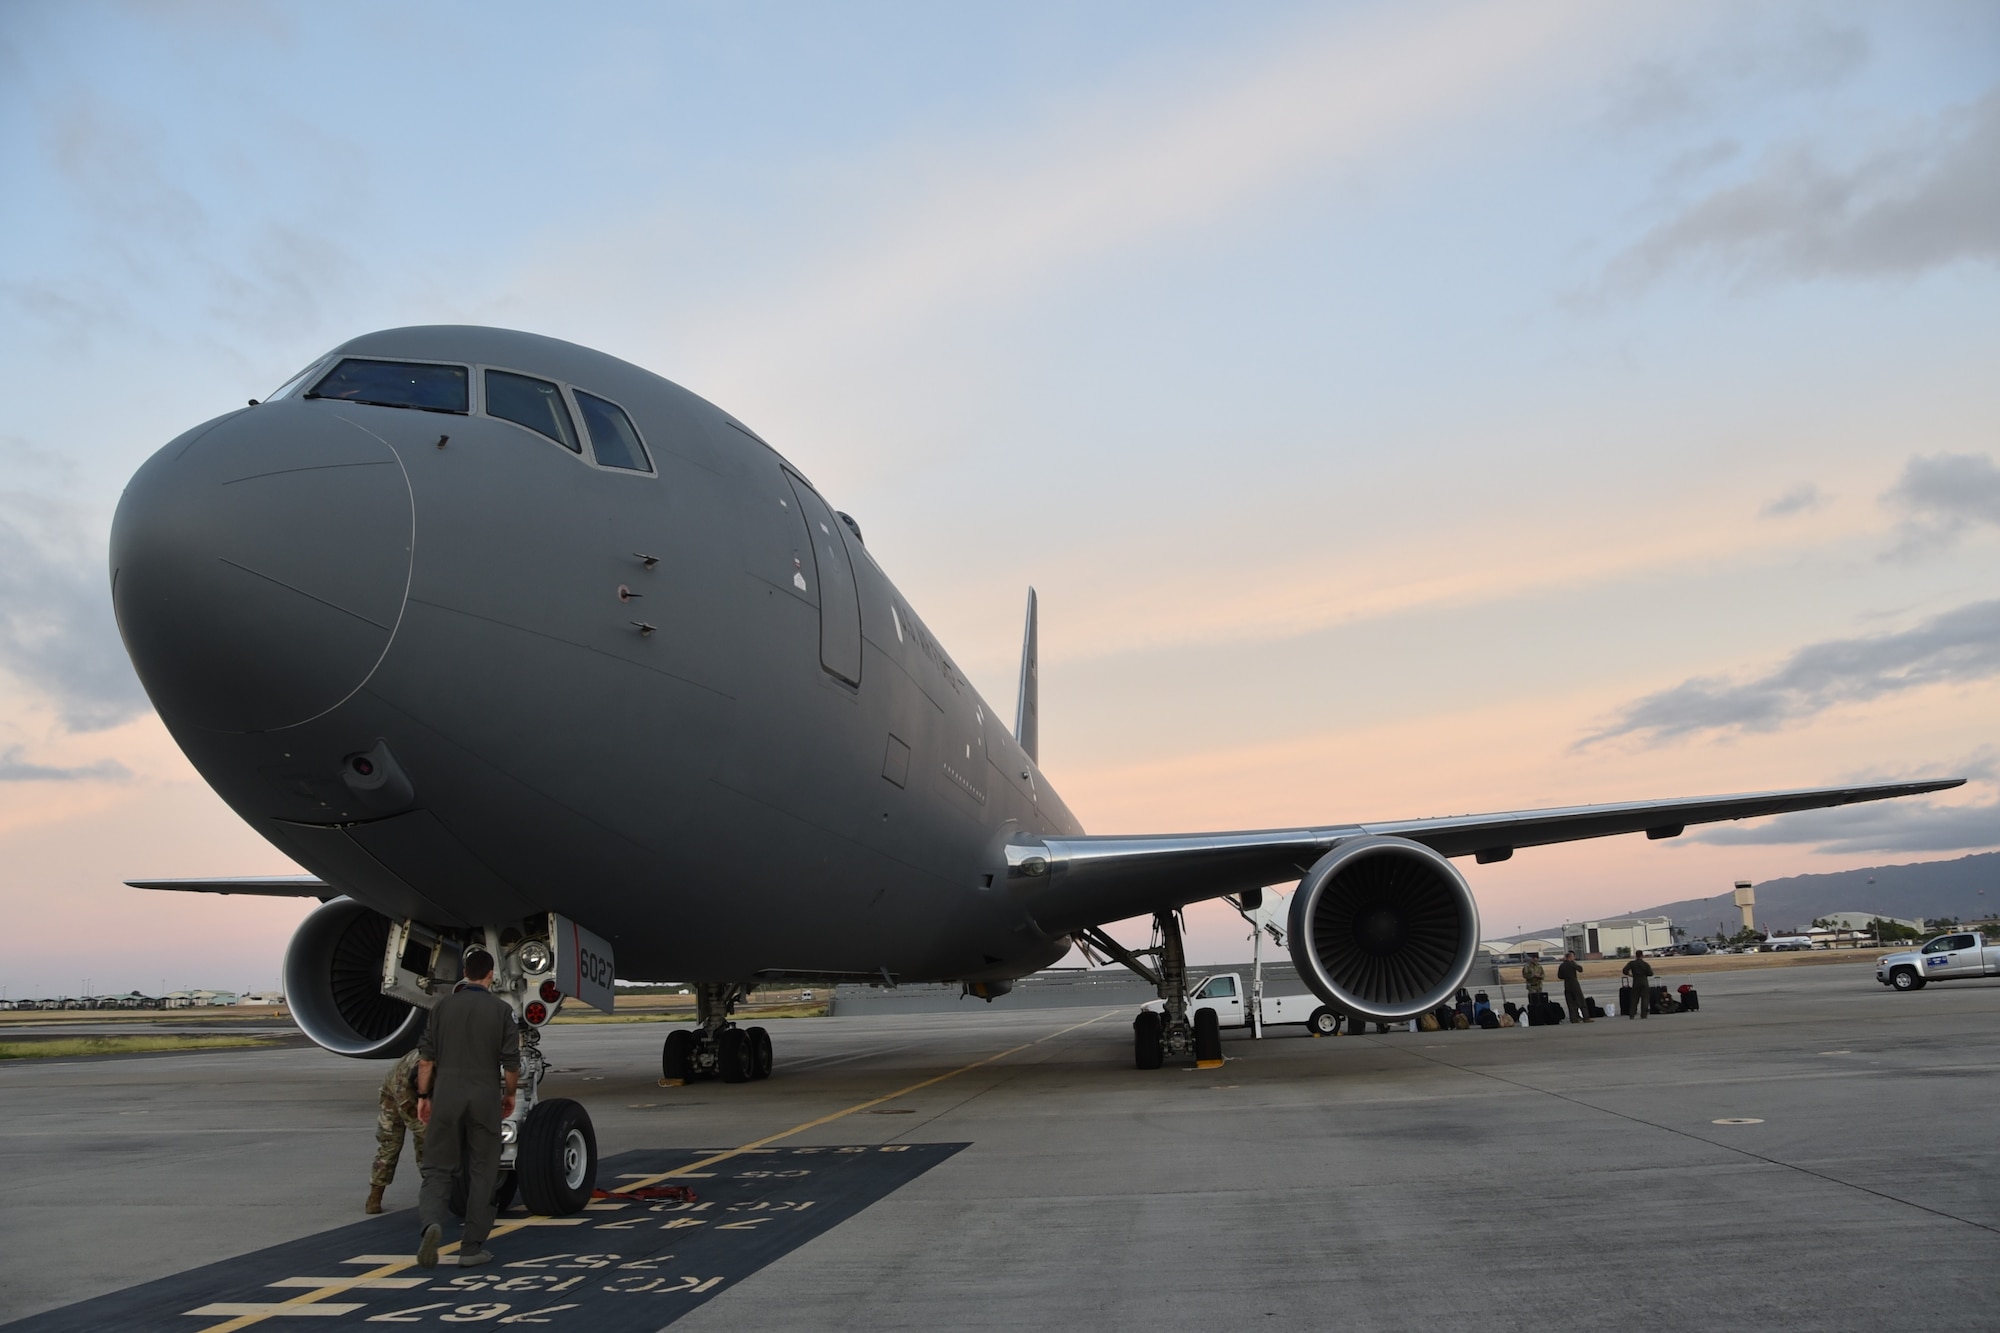 A KC-46A Pegasus assigned to the 22nd Air Refueling Wing at McConnell Air Force Base, Kansas, prepares for takeoff Aug. 21, 2020, at Hickam Air Force Base, Hawaii.  The KC-46 was part of the first 931st Air Refueling Wing-lead cargo mission which helped offload more than 11,000 pounds of pallets to four locations worldwide in six days.